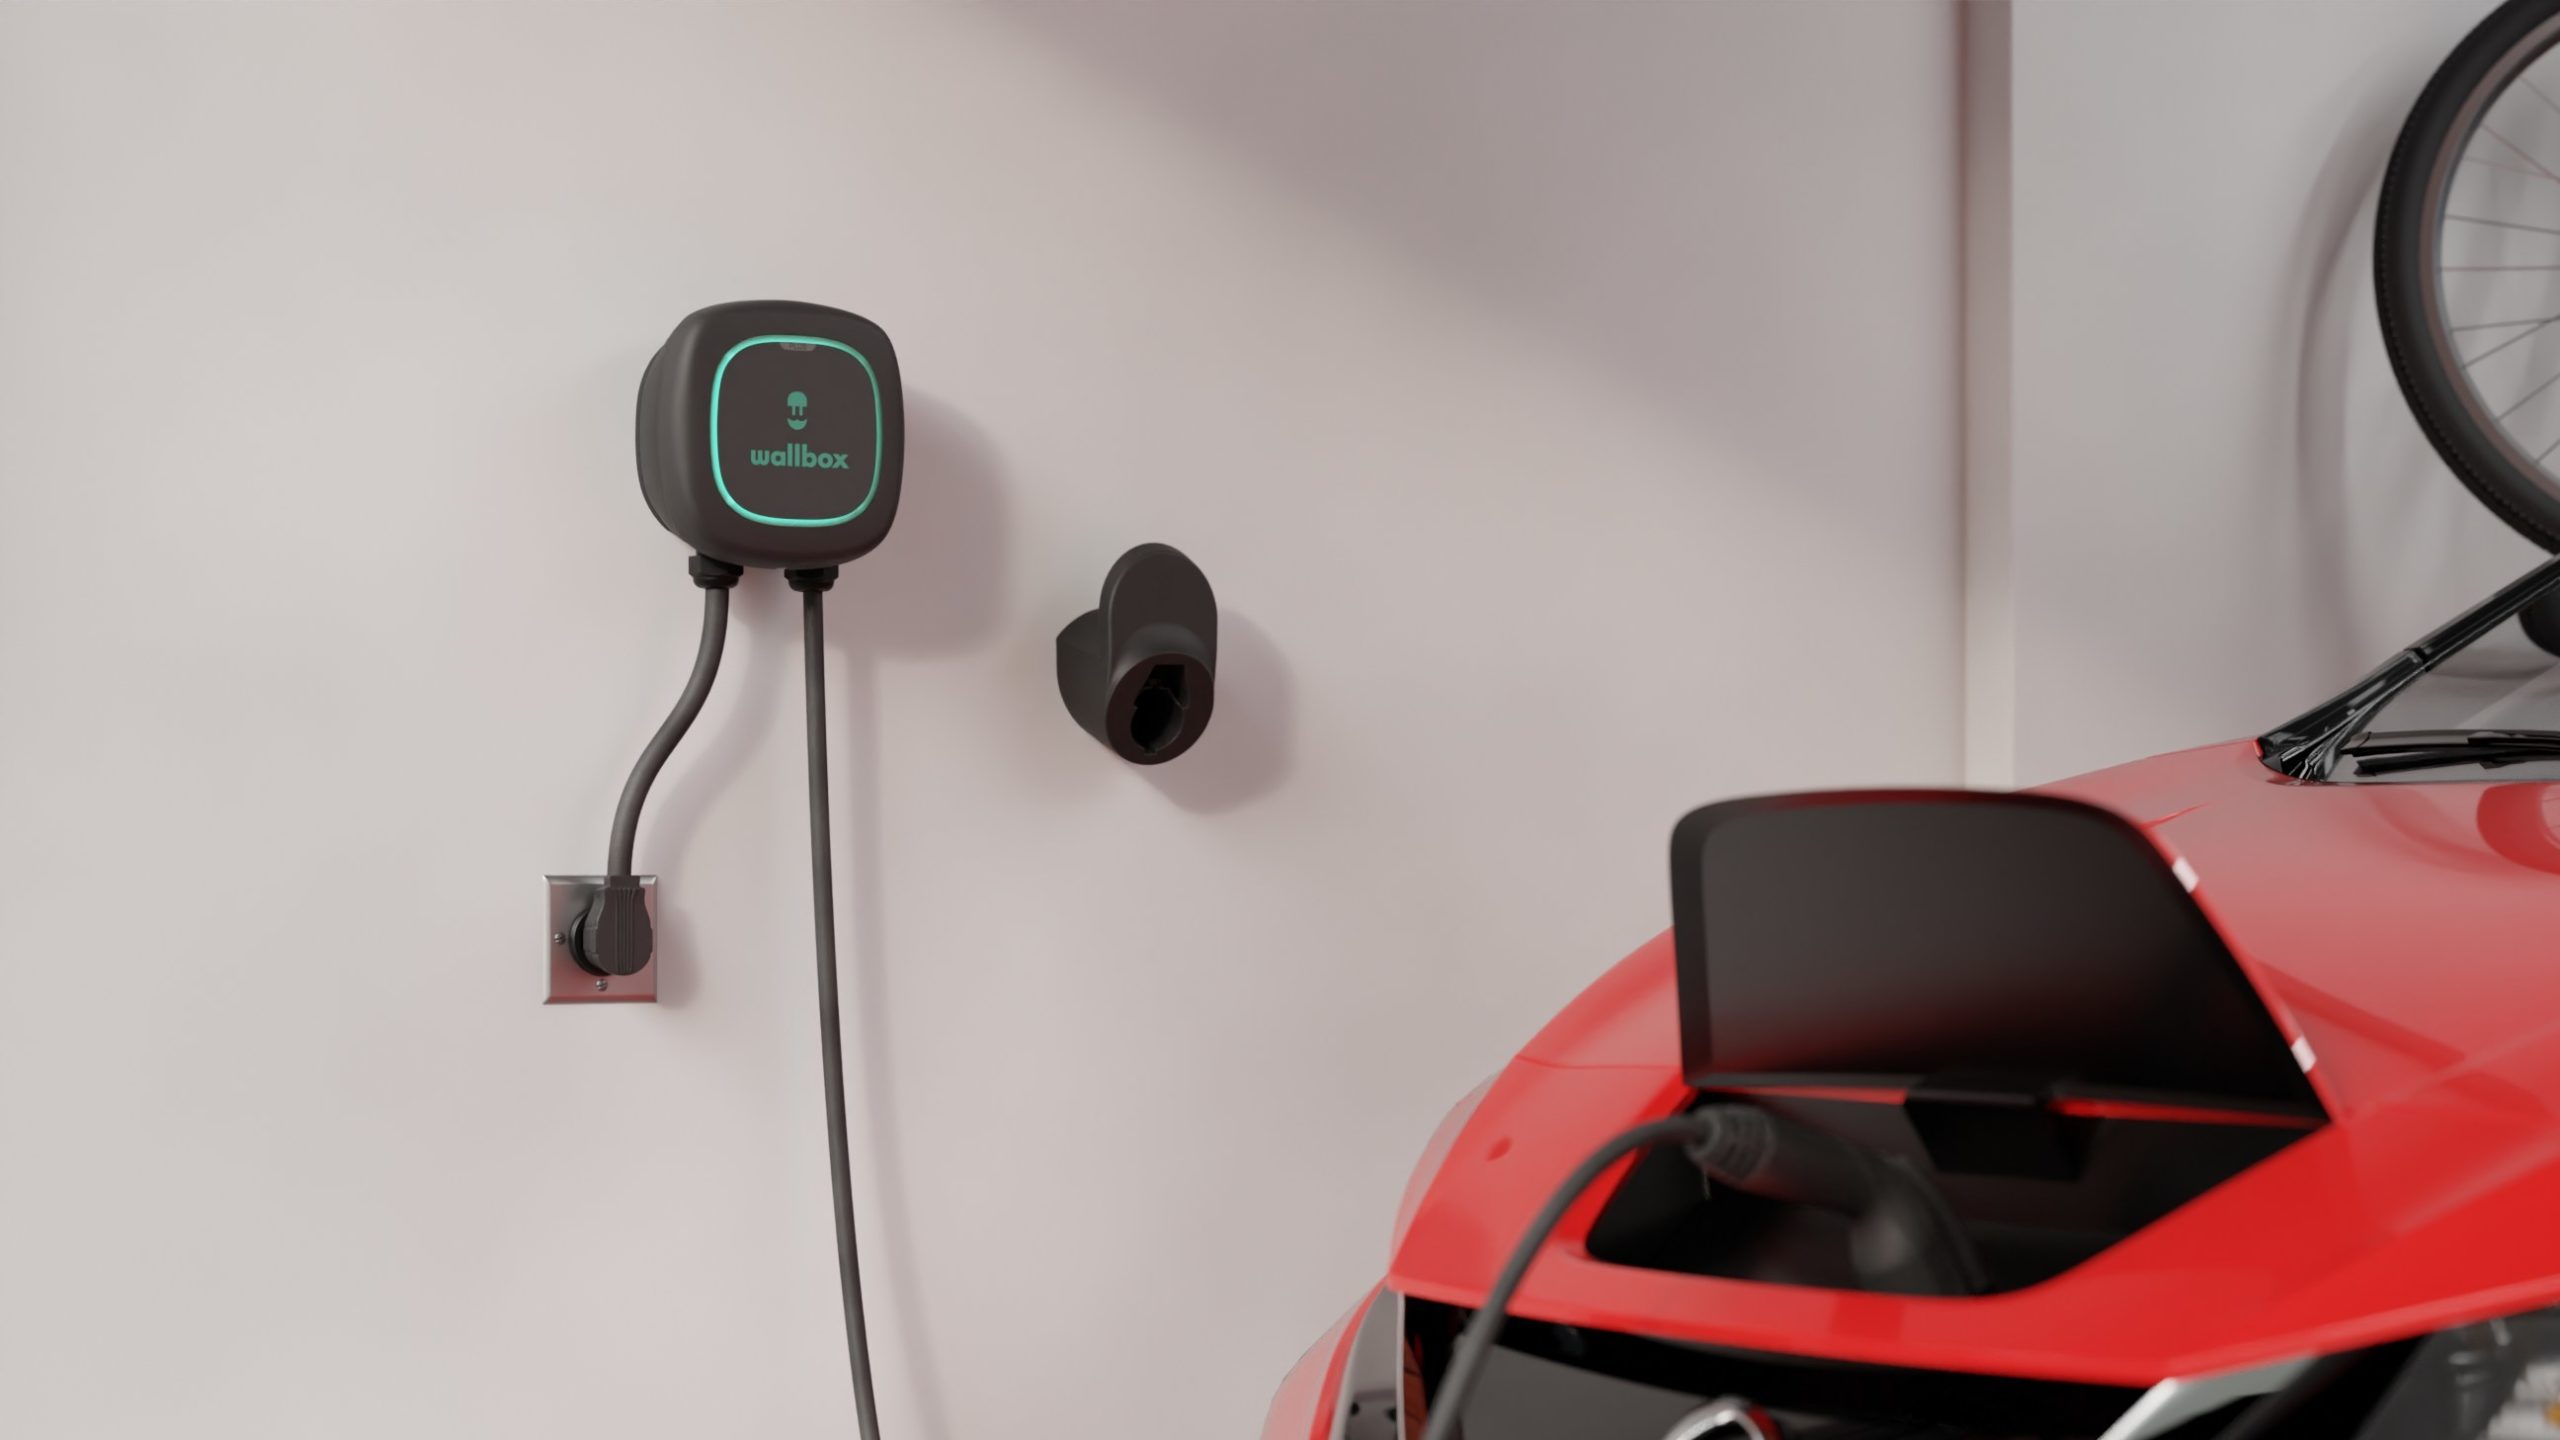 Sunverge Simply Energy Nissan and Wallbox partner on vehicle to home and EV to grid services 